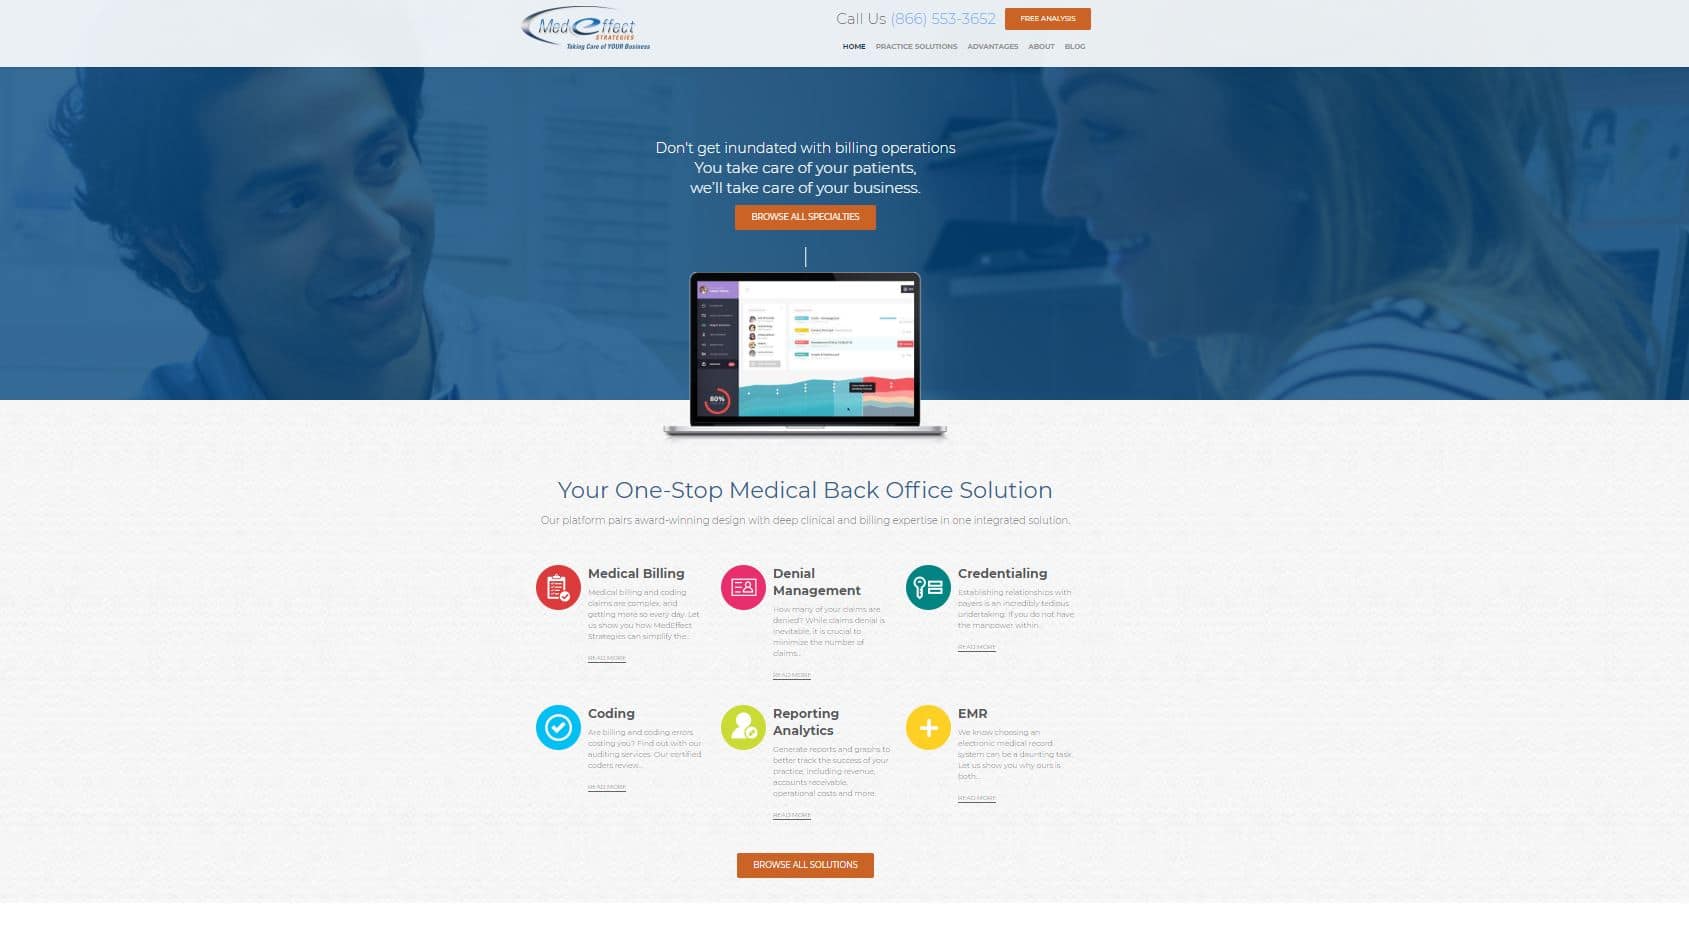 Med Effect Strategies is able to Attract New Clients due to Their Updated Website